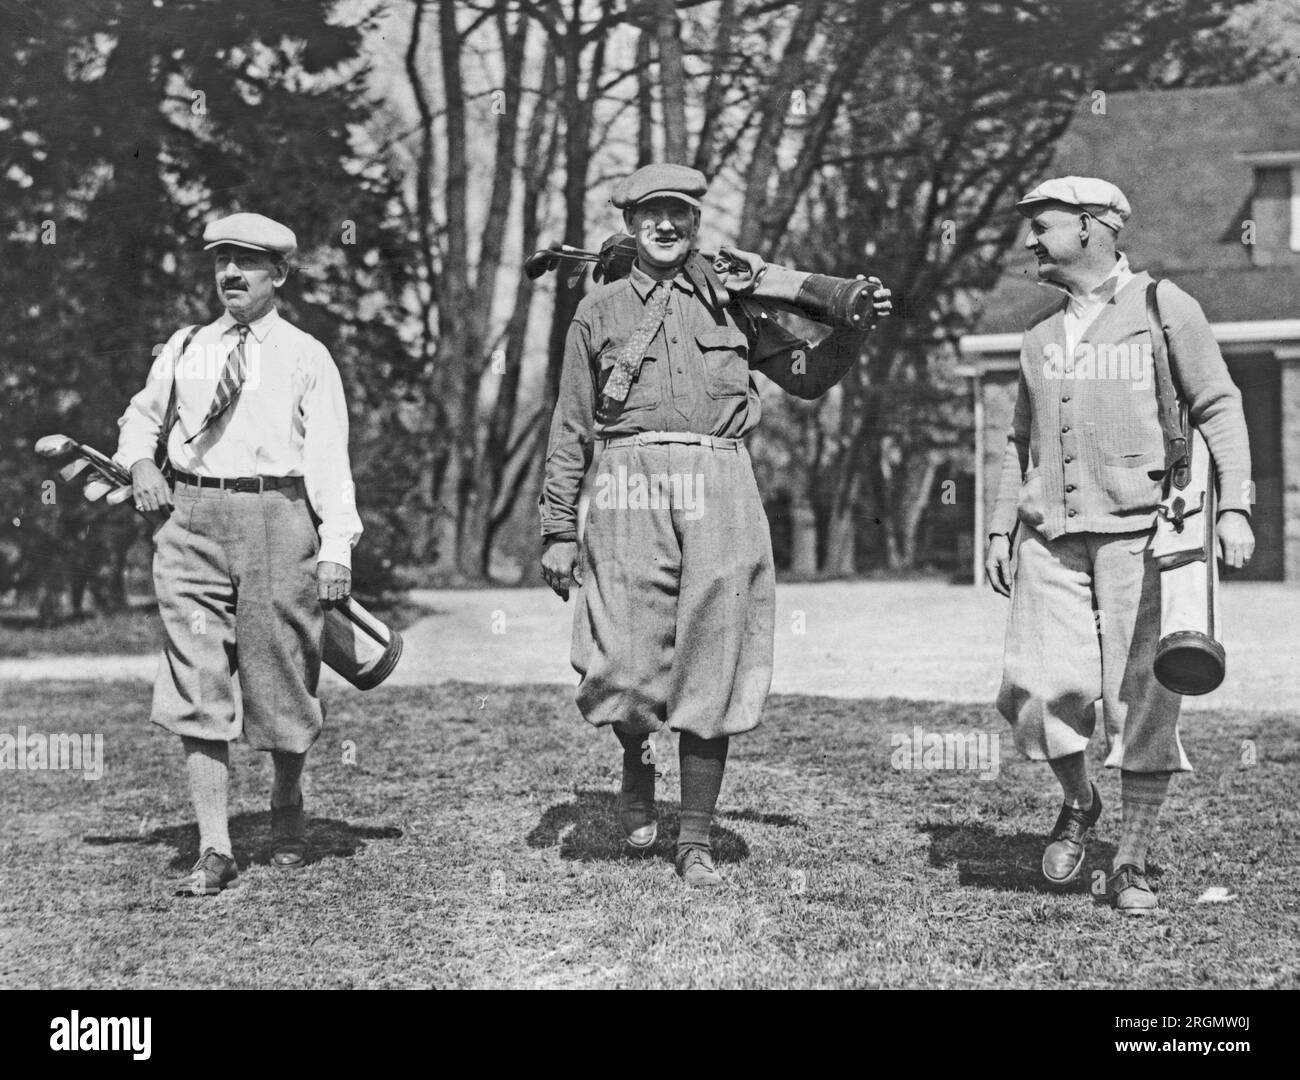 Congressmen snapped on the golf links at Chevy Chase Club today. Left to right: Rep. Herbert W. Taylor of N.J., Rep. Albert H. Vestal of Indiana, the Republican Whip of the House, and Rep. Wm. R. Coyle of Pa. ca. 1926 Stock Photo